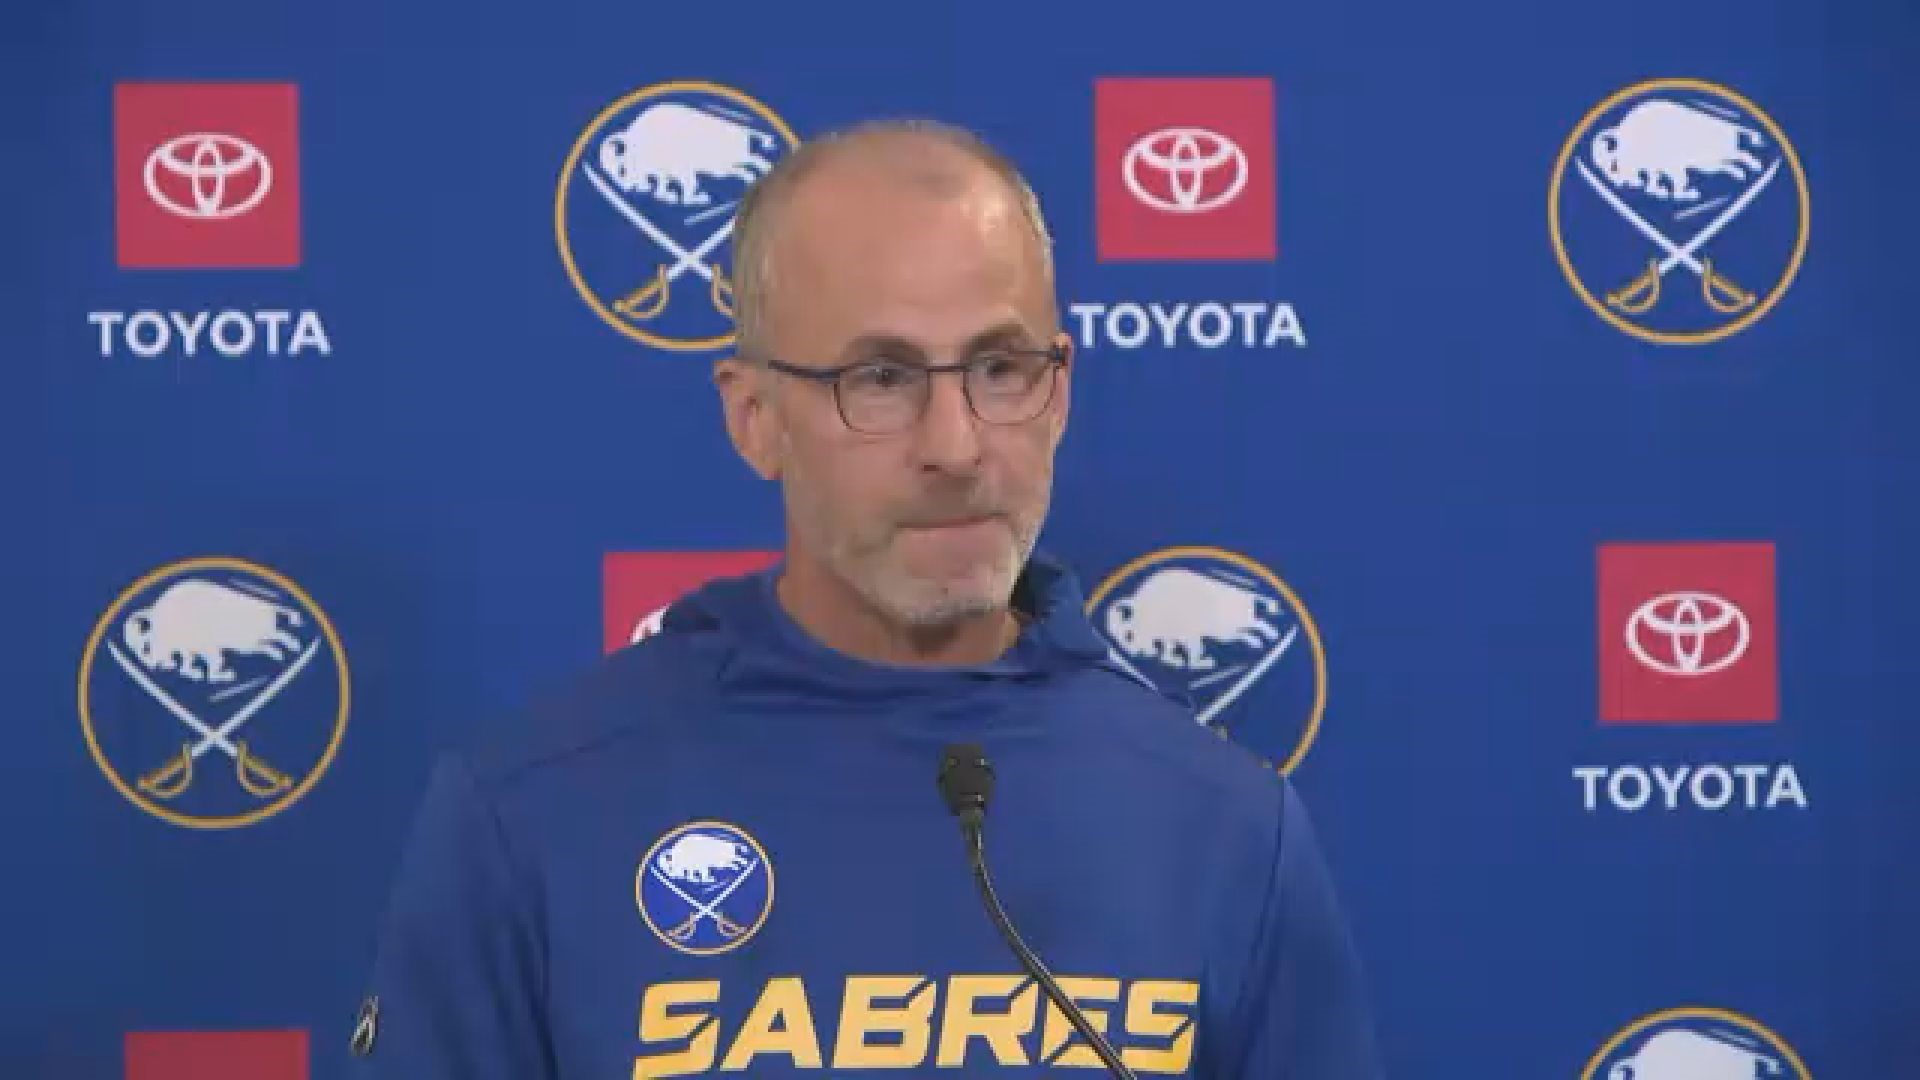 Sabres head coach Don Granato is looking forward to the start of training camp.